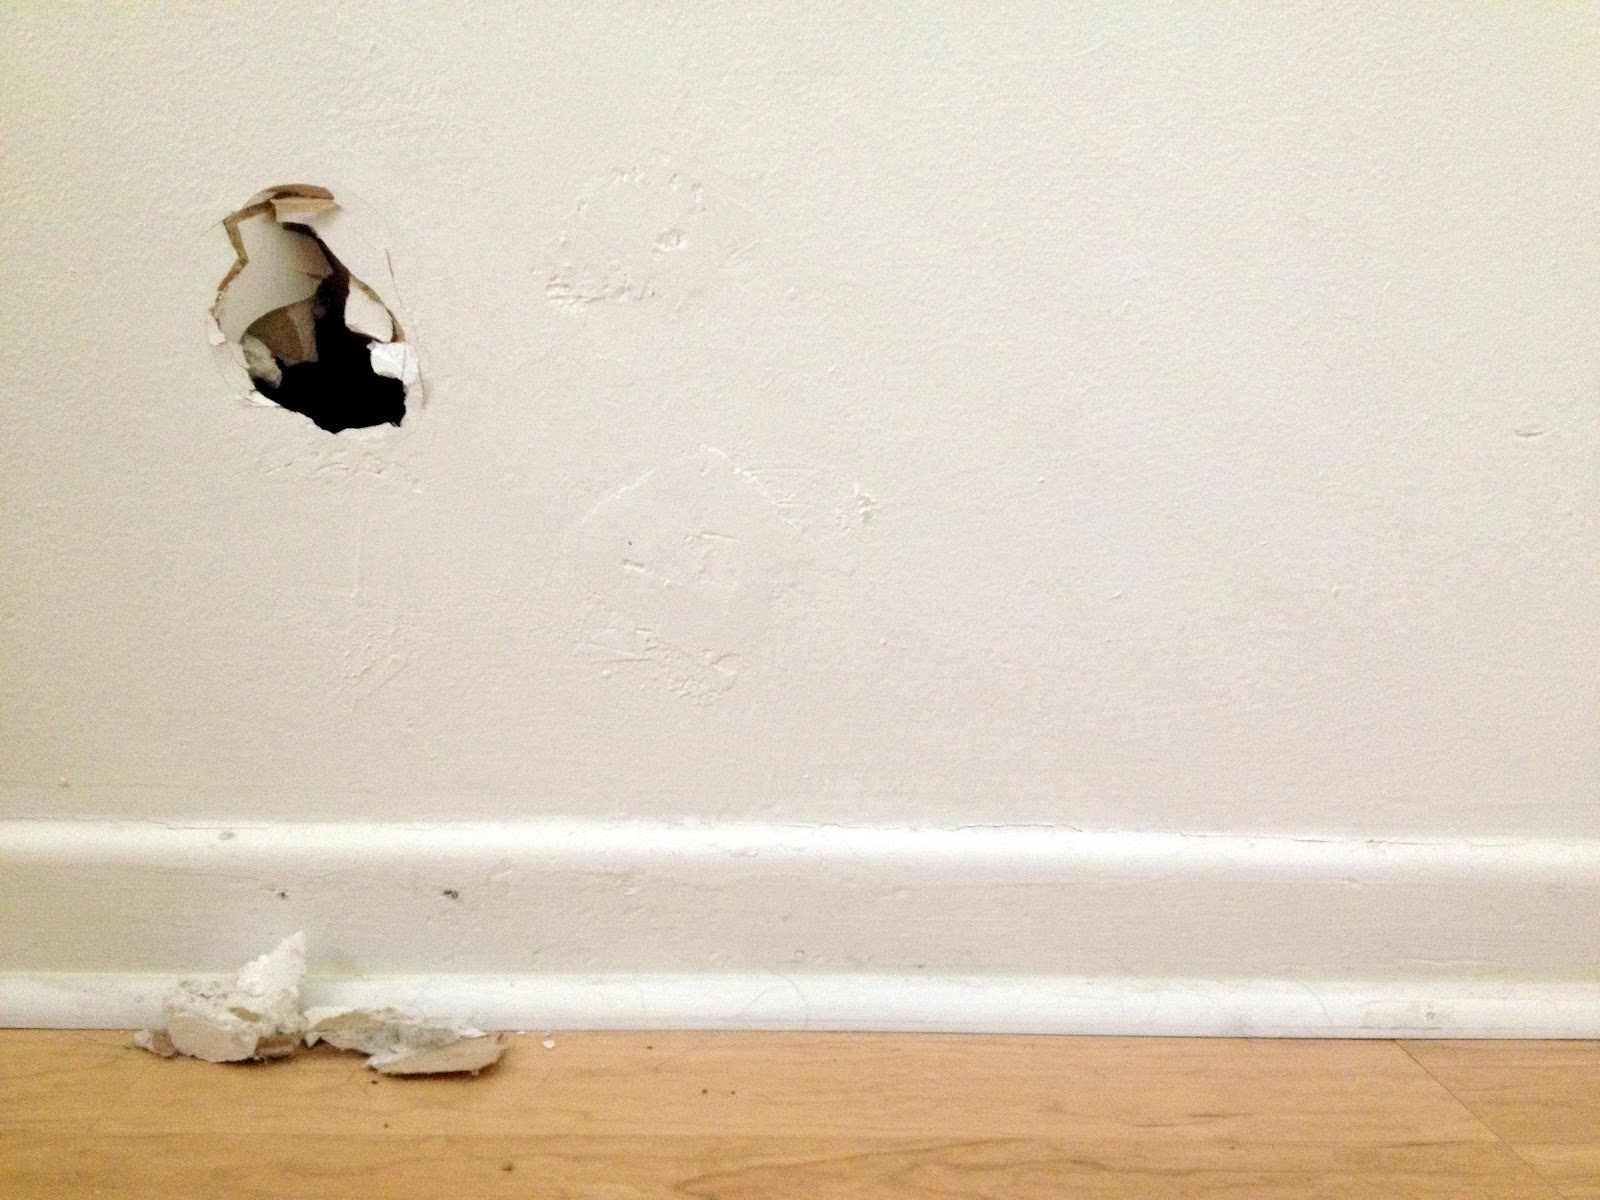 Easy Steps To Patch And Fix A Hole In The Wall